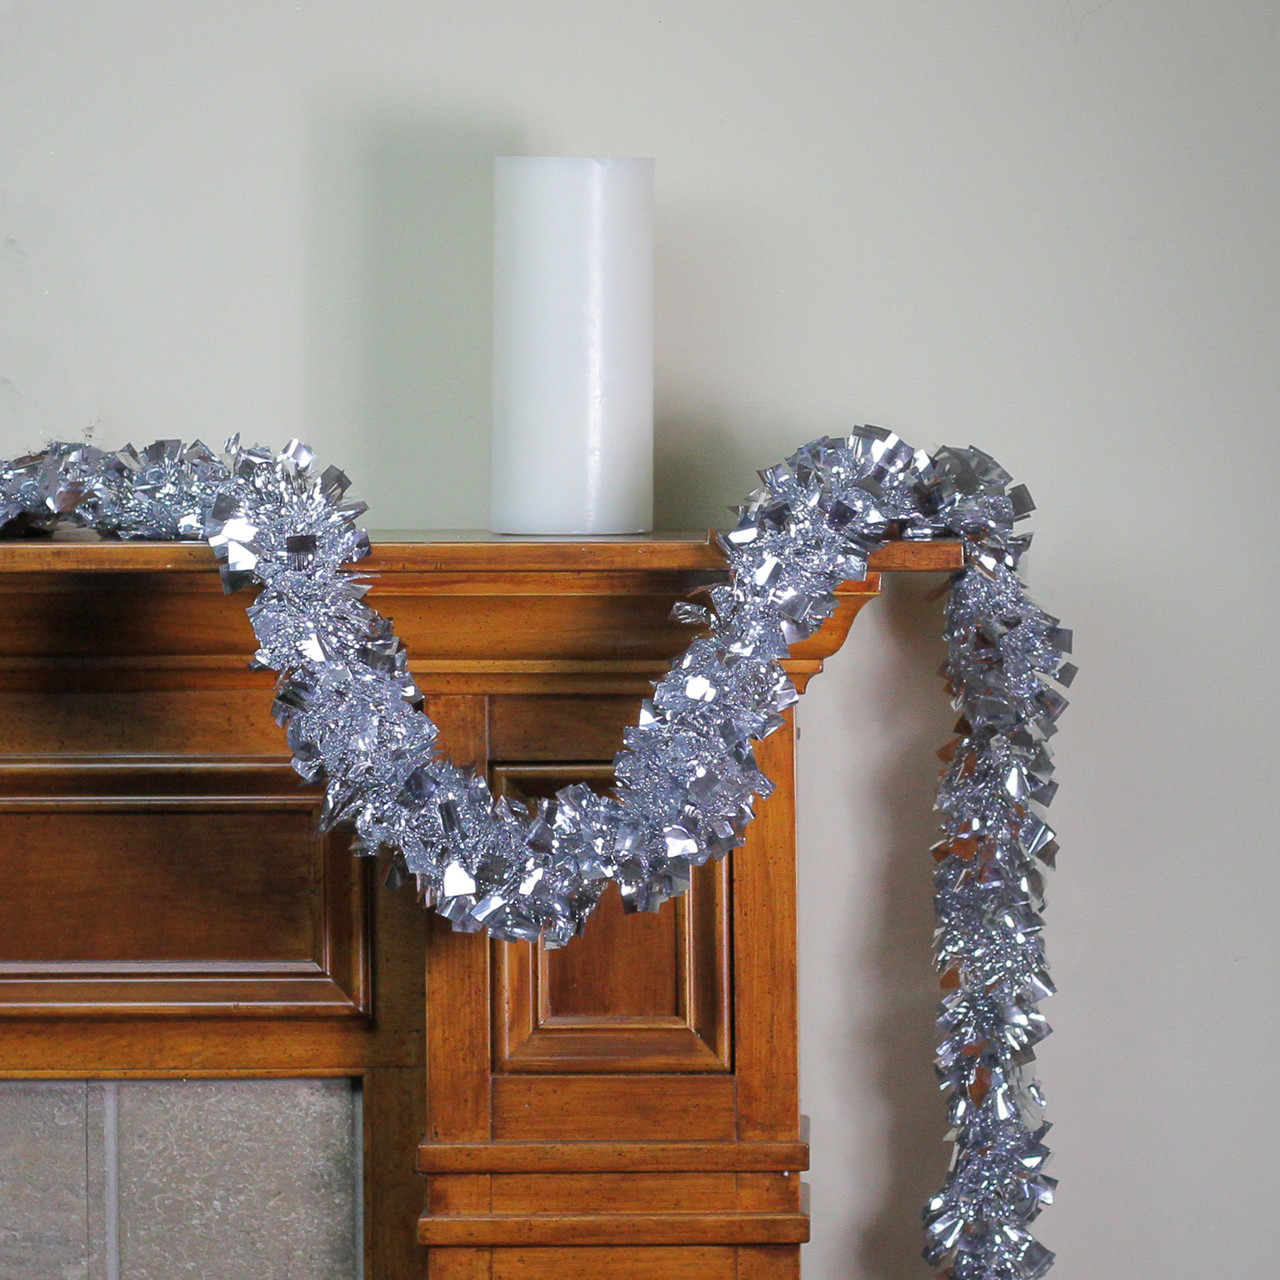 Northlight 12' x 3 inch White Iridescent and Silver Snowflakes Christmas Tinsel Garland - Unlit